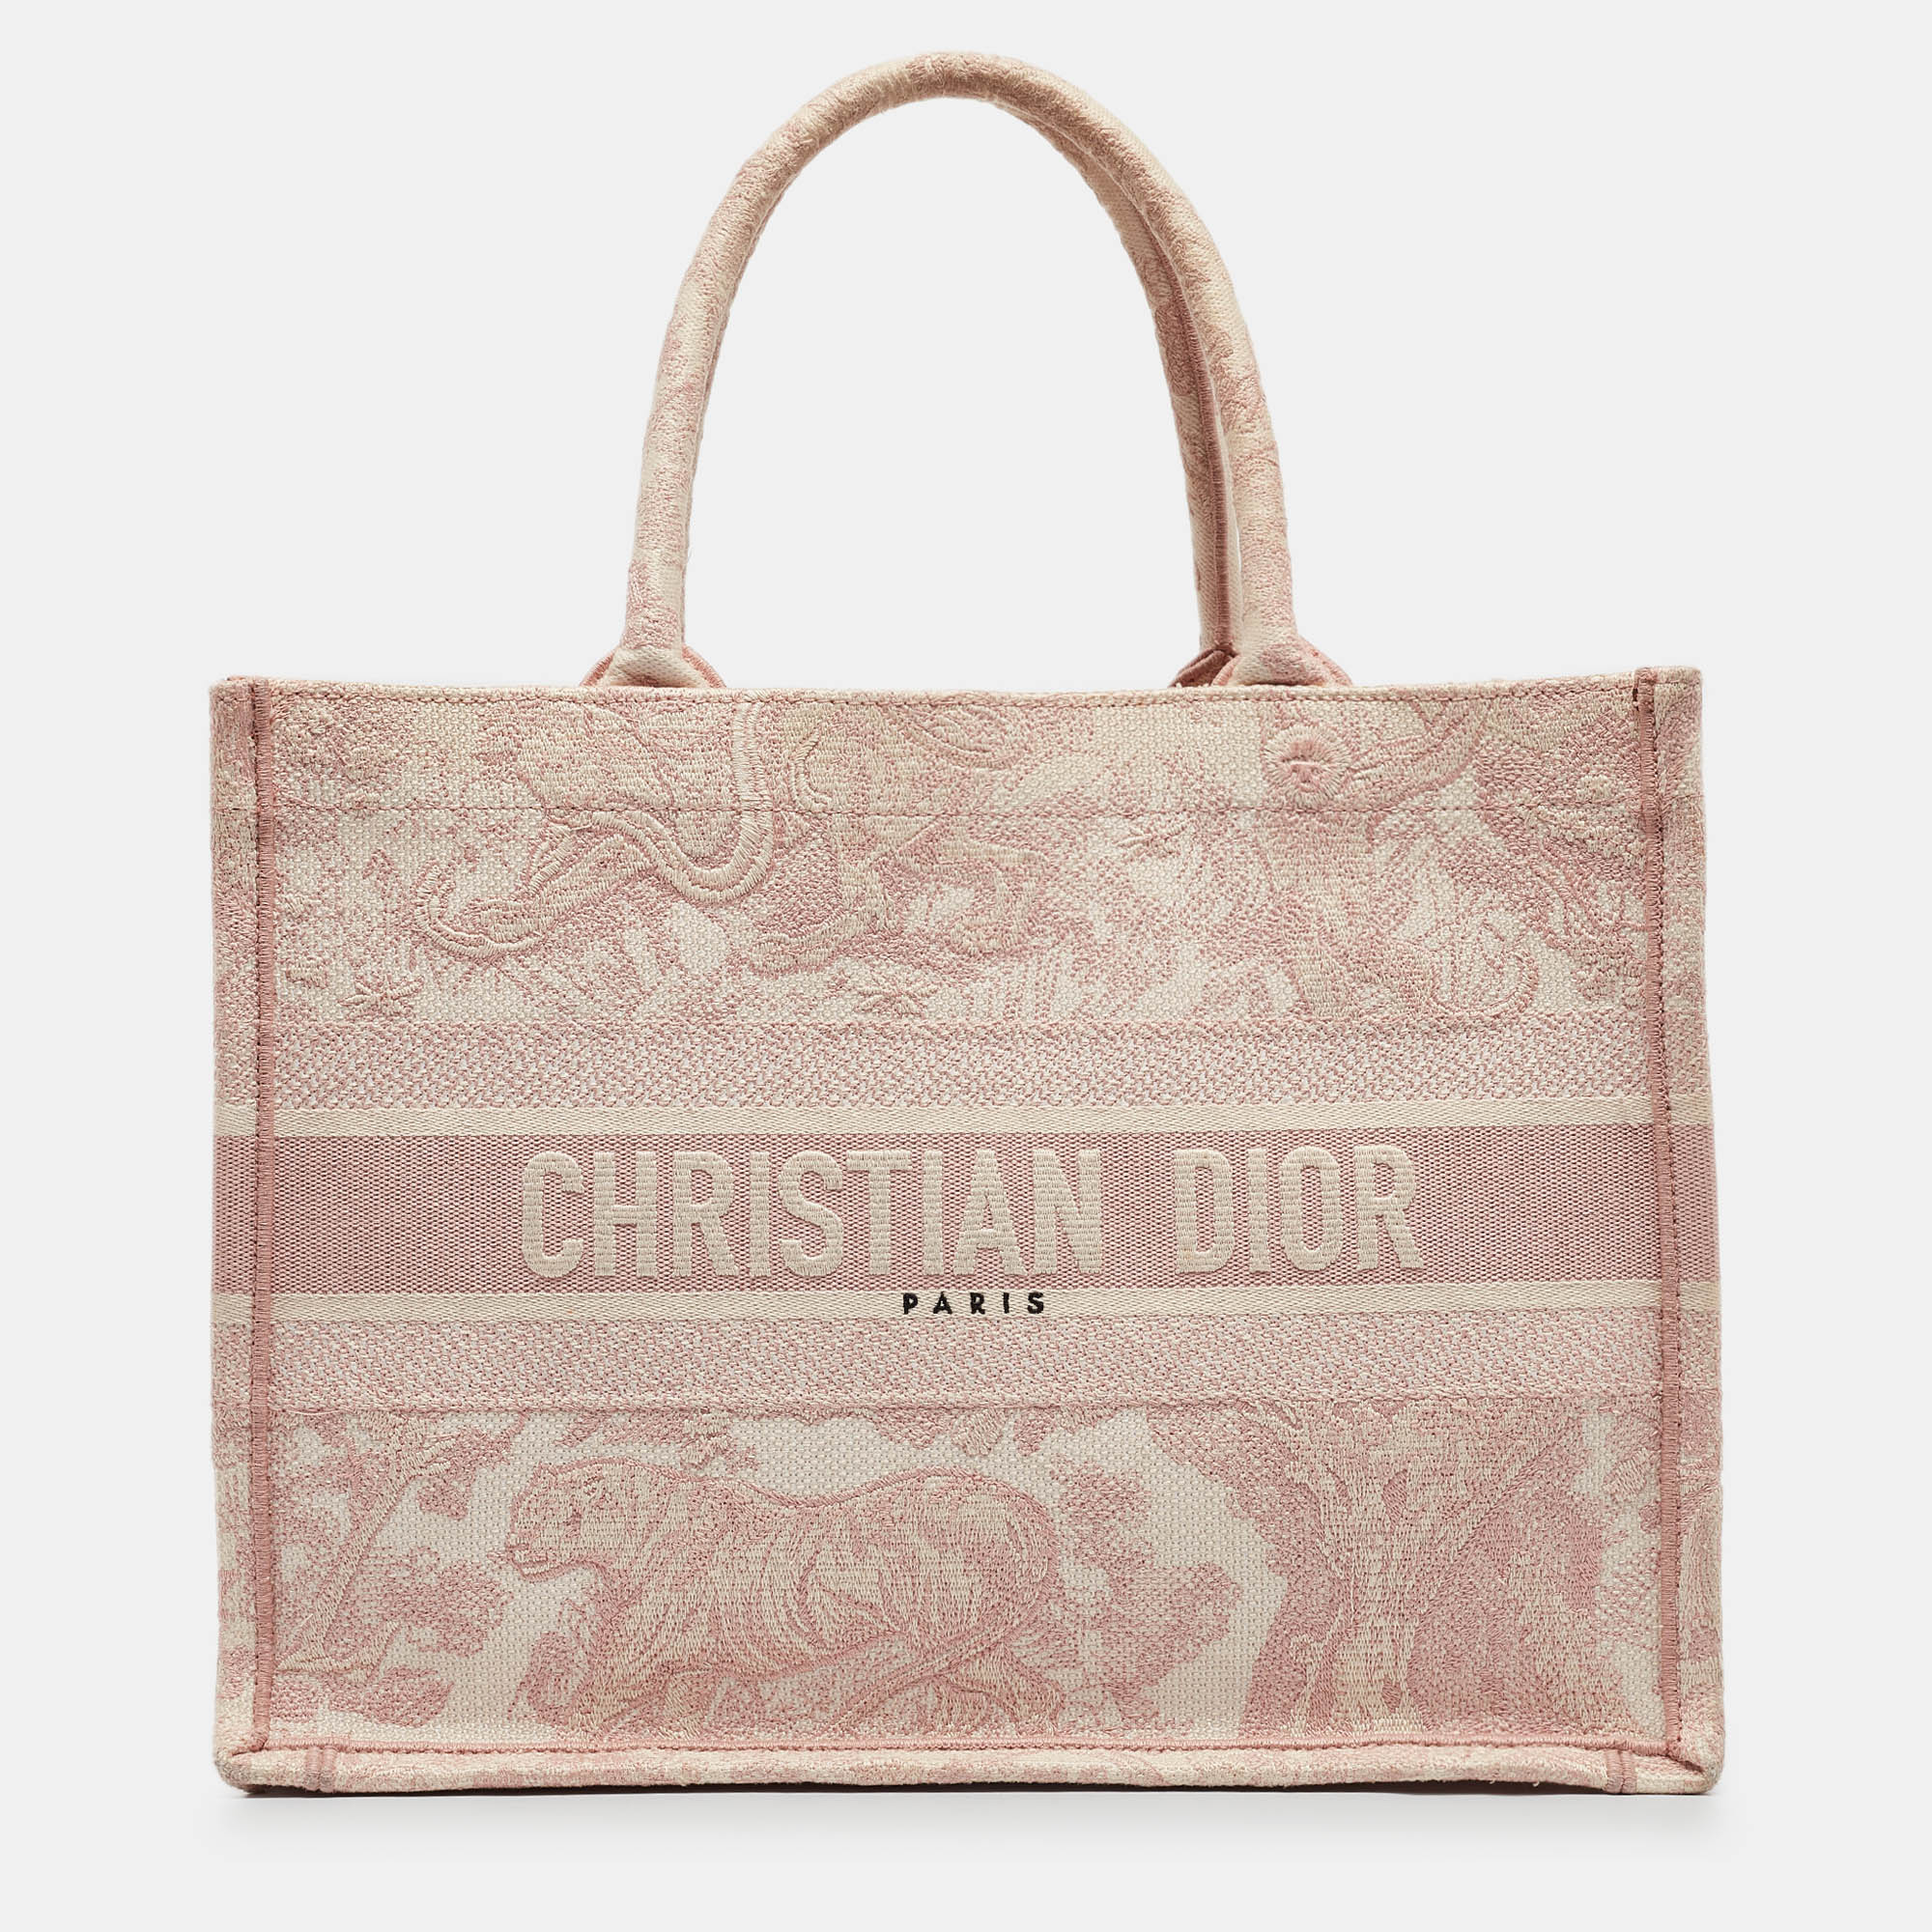 Dior pink embroidery canvas medium book tote